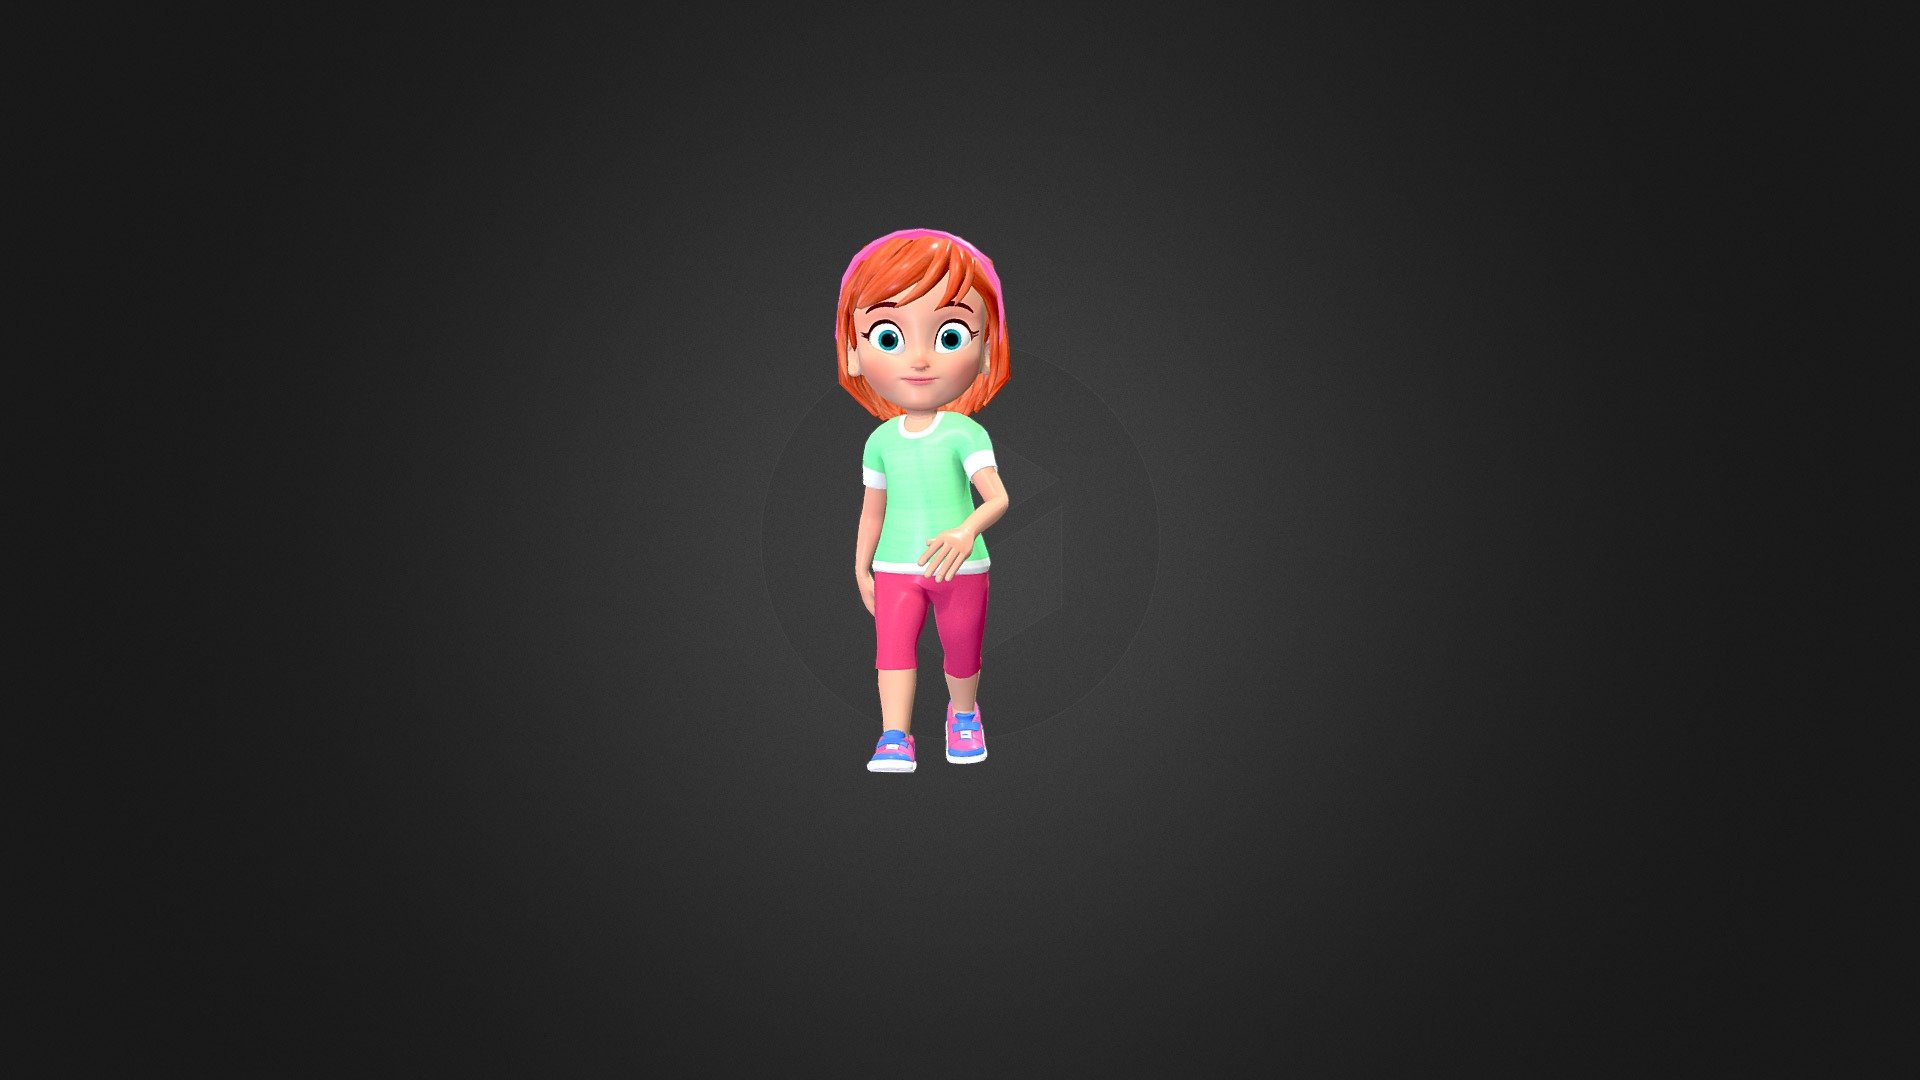 Little Girl:
A low-poly Little Girl with hand painted high quality texture.This Assets use AR,VR,mobile Game,pc game and any different projects.
All assets are created in a low poly art style. The material setups are simple and you are able to customize them easily.Use unity standard material.

Rig: Fully supports mecanim humanoid animation system.I hope you like this game ready asset. Humanoid mecanim system rig.

Textures Size:
2048x2048

Number of textures: 3( Base color Map)
Texture dimensions: 2k
Polygon count of [Little Girl]
Vertis: 24569
Face: 23688
Number of meshes: 1
Rigging: Yes
Animation count: : 18
Attack_01,Attack_02,Idle_01,Idle_02,,Idle_03,Die_Forward,Die_Backward,Walk_Forward,Walk_Backward,Run Forward,Run_Backward,Jump,Gatting Up ,Talking,StandingUp,Gesture,Walk_Lfet,Walk_Right,.
Animation type list: RootMotion &amp; In Place
UV mapping: Yes, Non-Overlapping
All Gaming Engine Supported,Like-Unity.Unriel Engine Ect 3d model